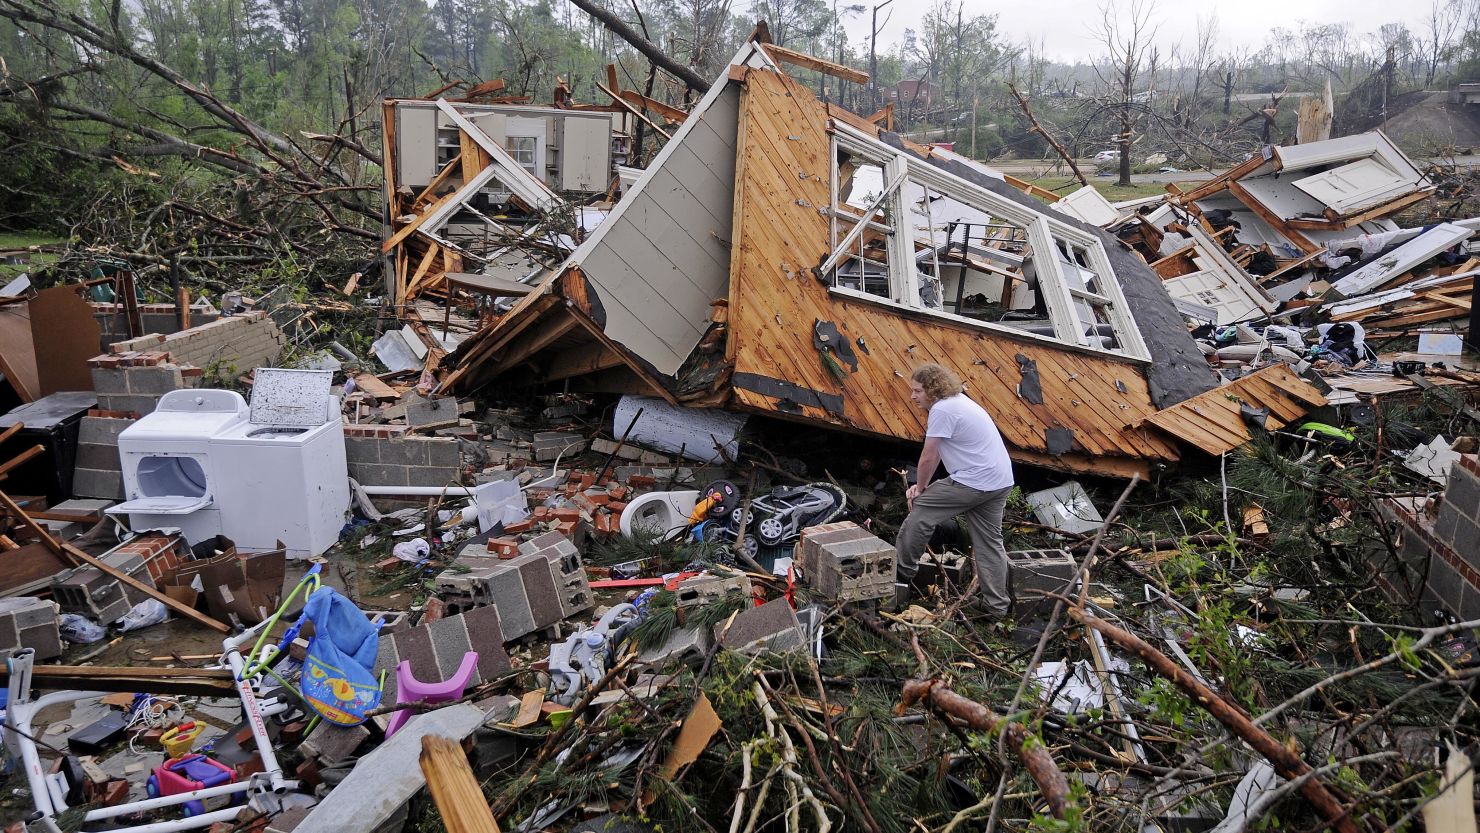 Kevin Barnes searches the remains of his home on Clayton Avenue in Tupelo, Miss., Tuesday, April 29, 2014. A dangerous storm system that spawned a chain of deadly tornadoes over three days flattened homes and businesses, forced frightened residents in more than half a dozen states to take cover and left tens of thousands in the dark Tuesday. (AP Photo/Thomas Graning)